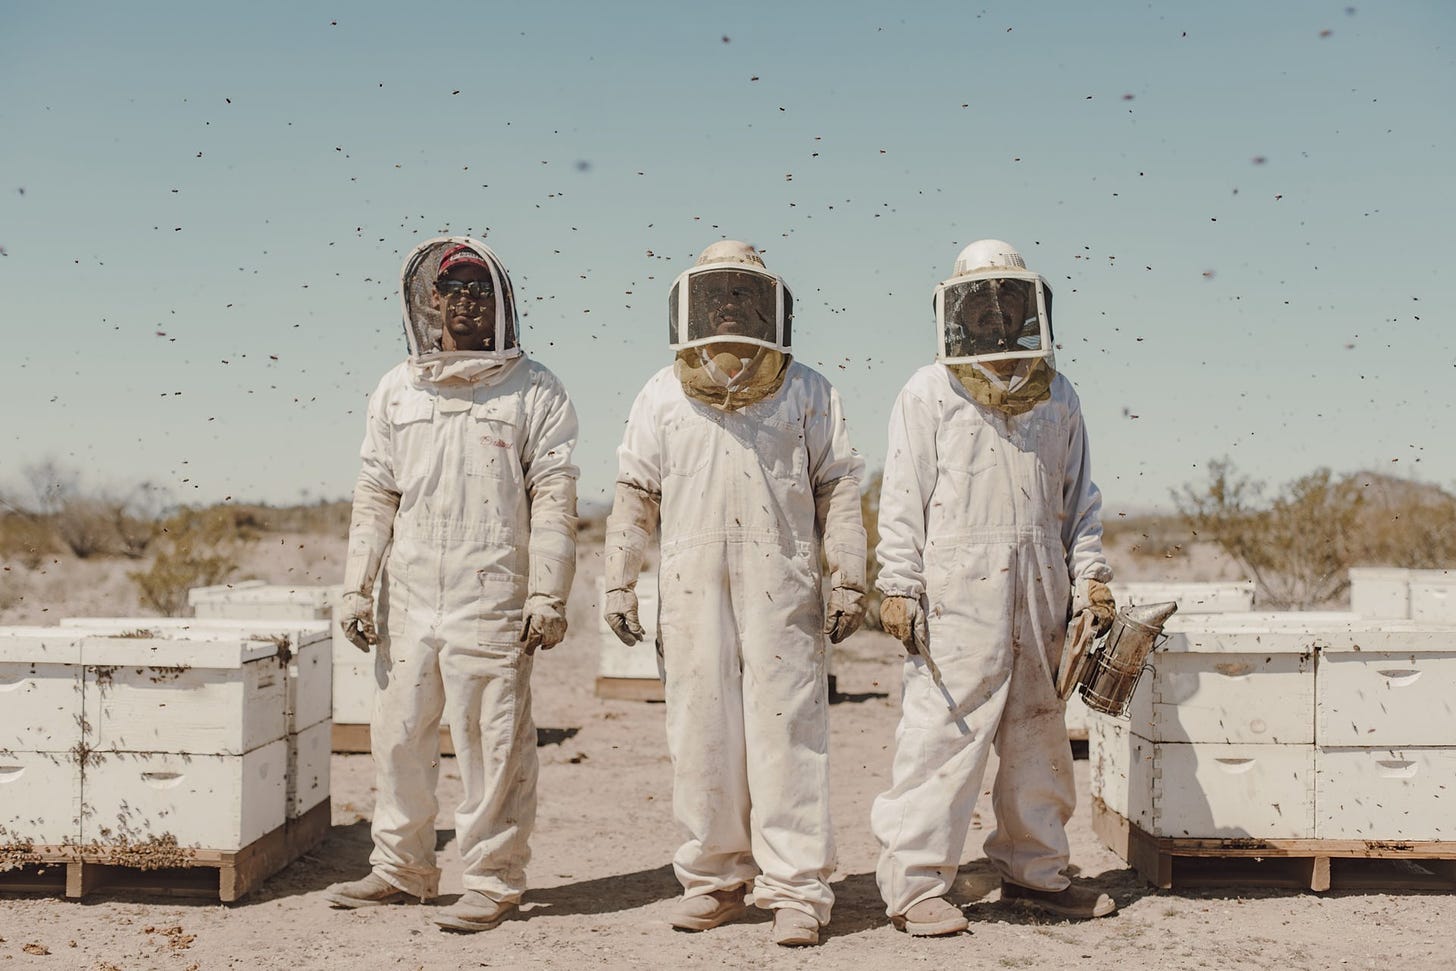 <p>Alfredo, Ubaldo, and José tend beehives near Wenden in the Arizona desert, United States. A substantial decrease in rainfall in the area means that the men must now provide water for the bees in troughs.</p>
